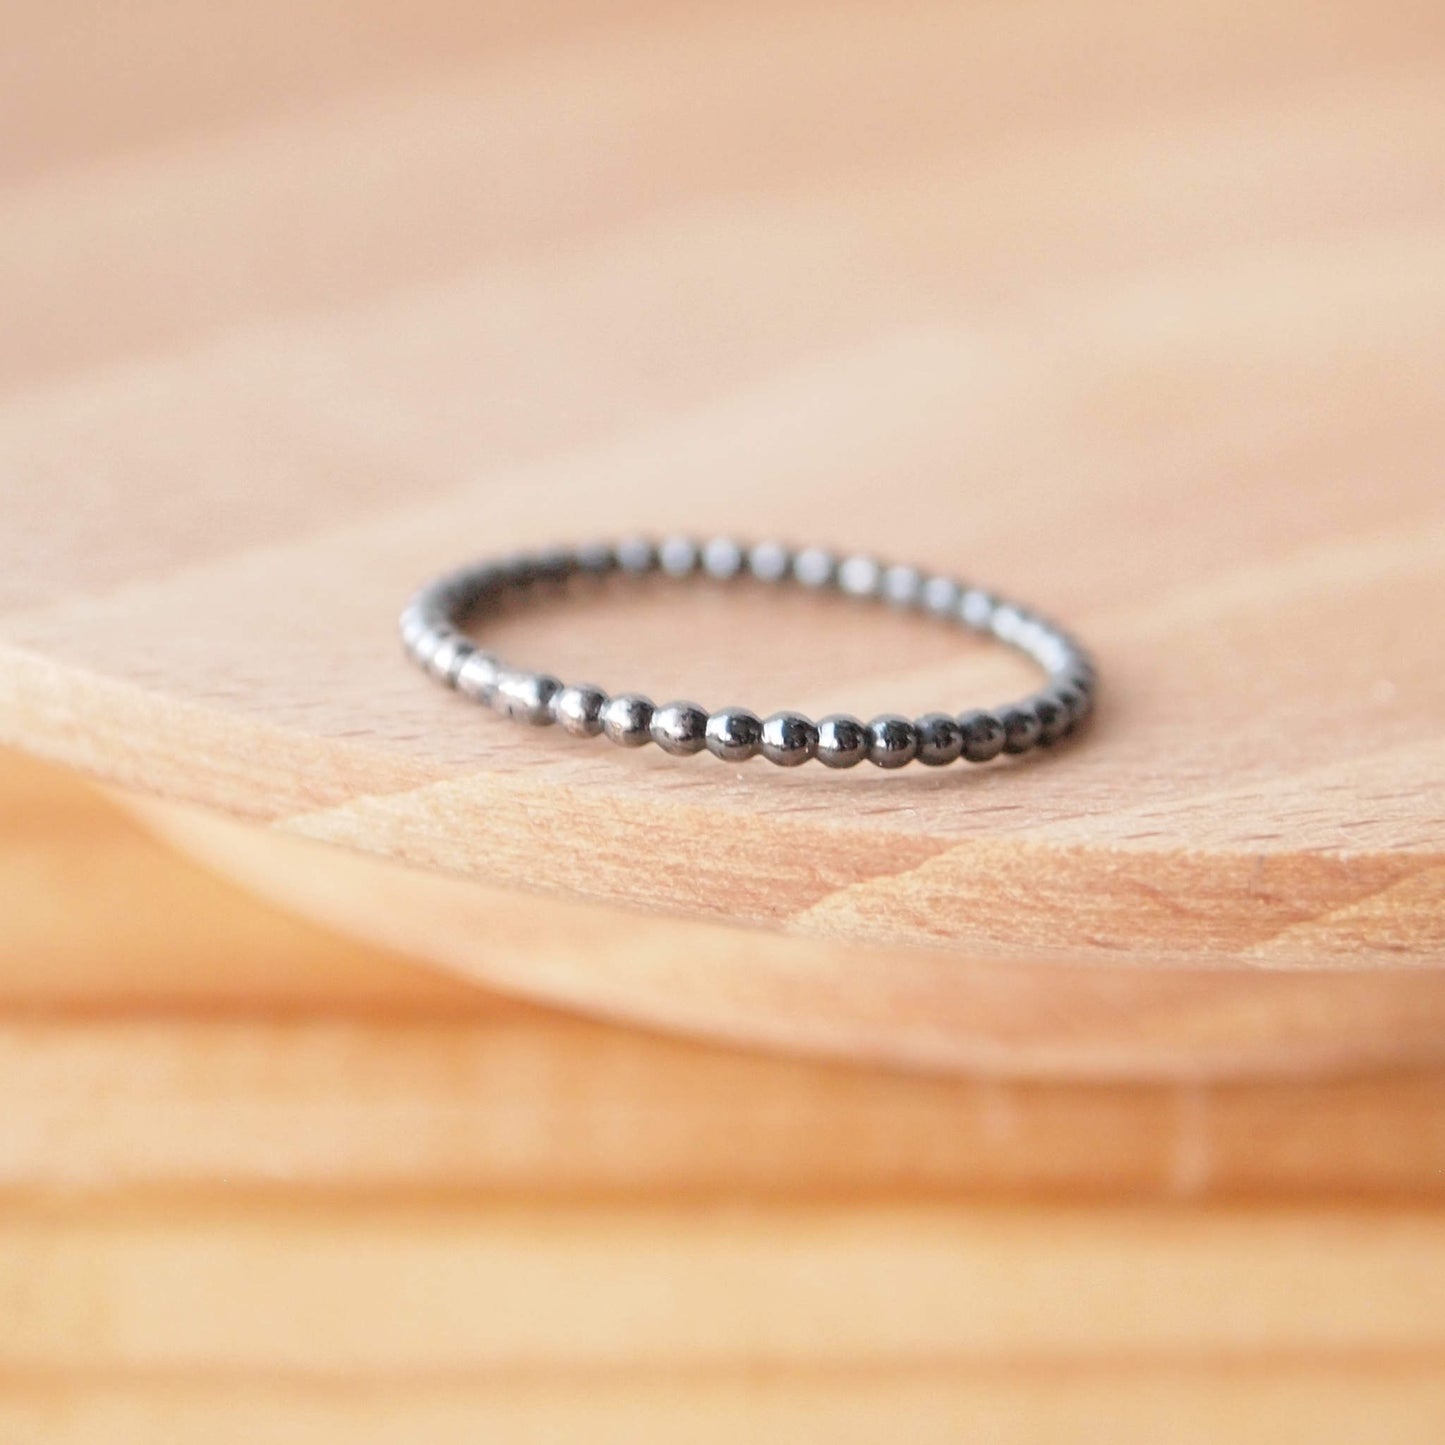 Black Silver ball bubble style ring. A simple band made from wire that looks like little round beads strung together. The ring is silver which has been oxidised to make it black. Handmade in Scotland by maram jewellery